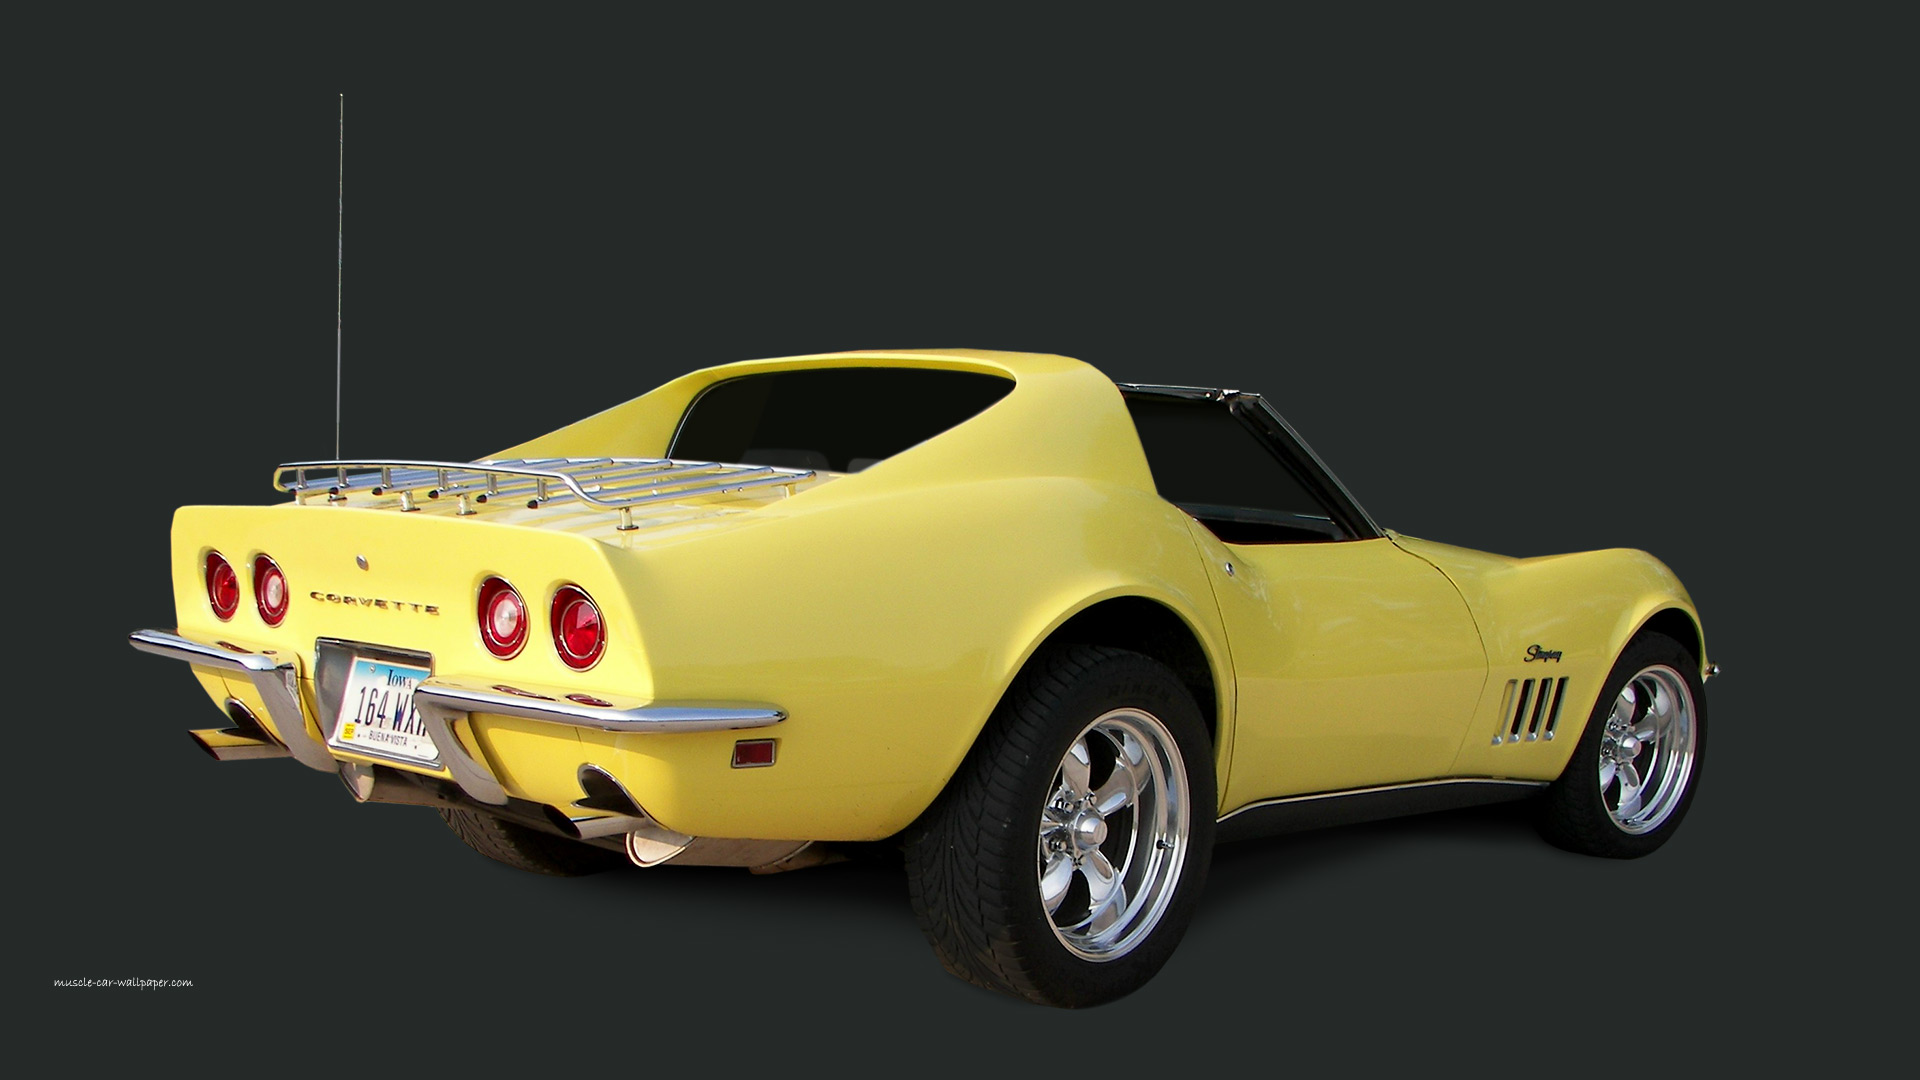 Corvette Muscle Car Wallpaper Other Sizes Available 1920